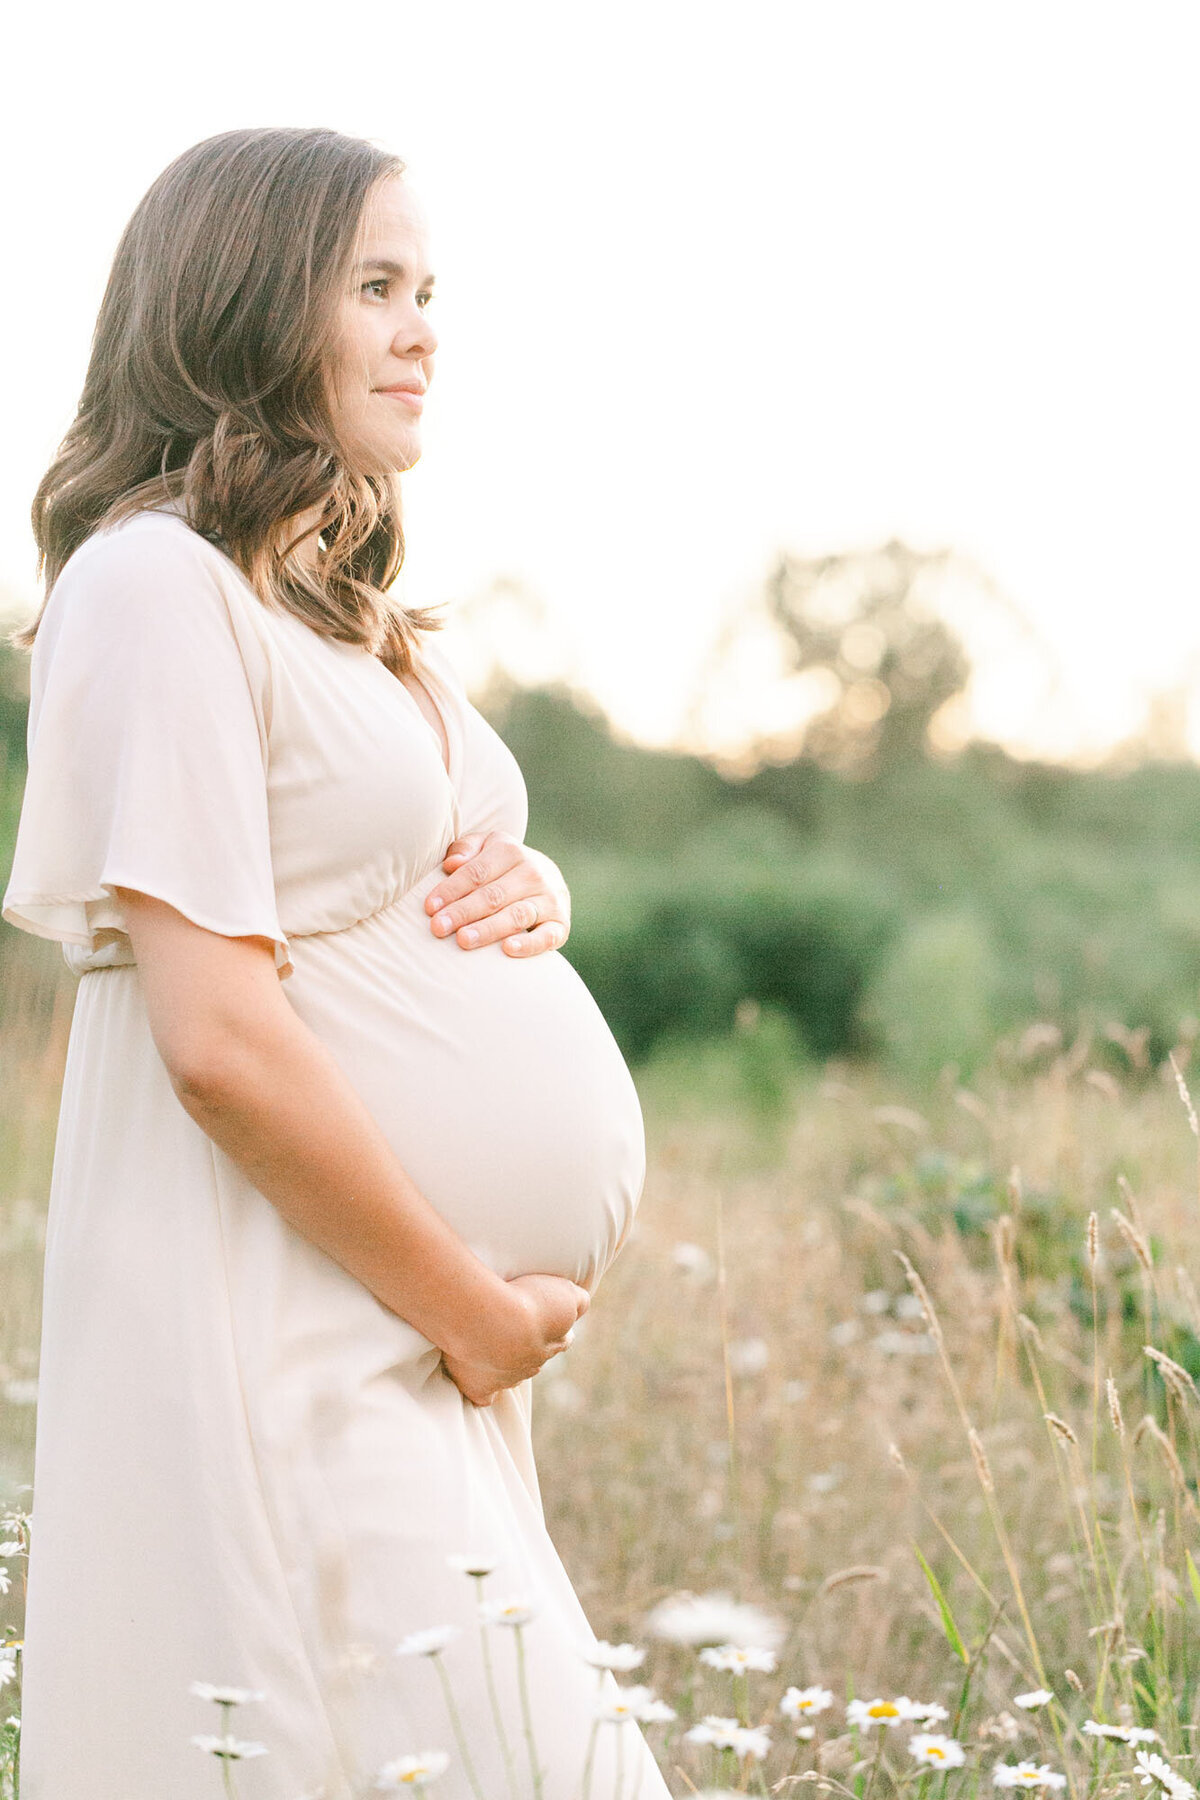 Profile image of a woman in cream dress holding  her baby bump and looking off into the sunset. She is standing in a field of golden grasses with some white wildflowers in the foreground.